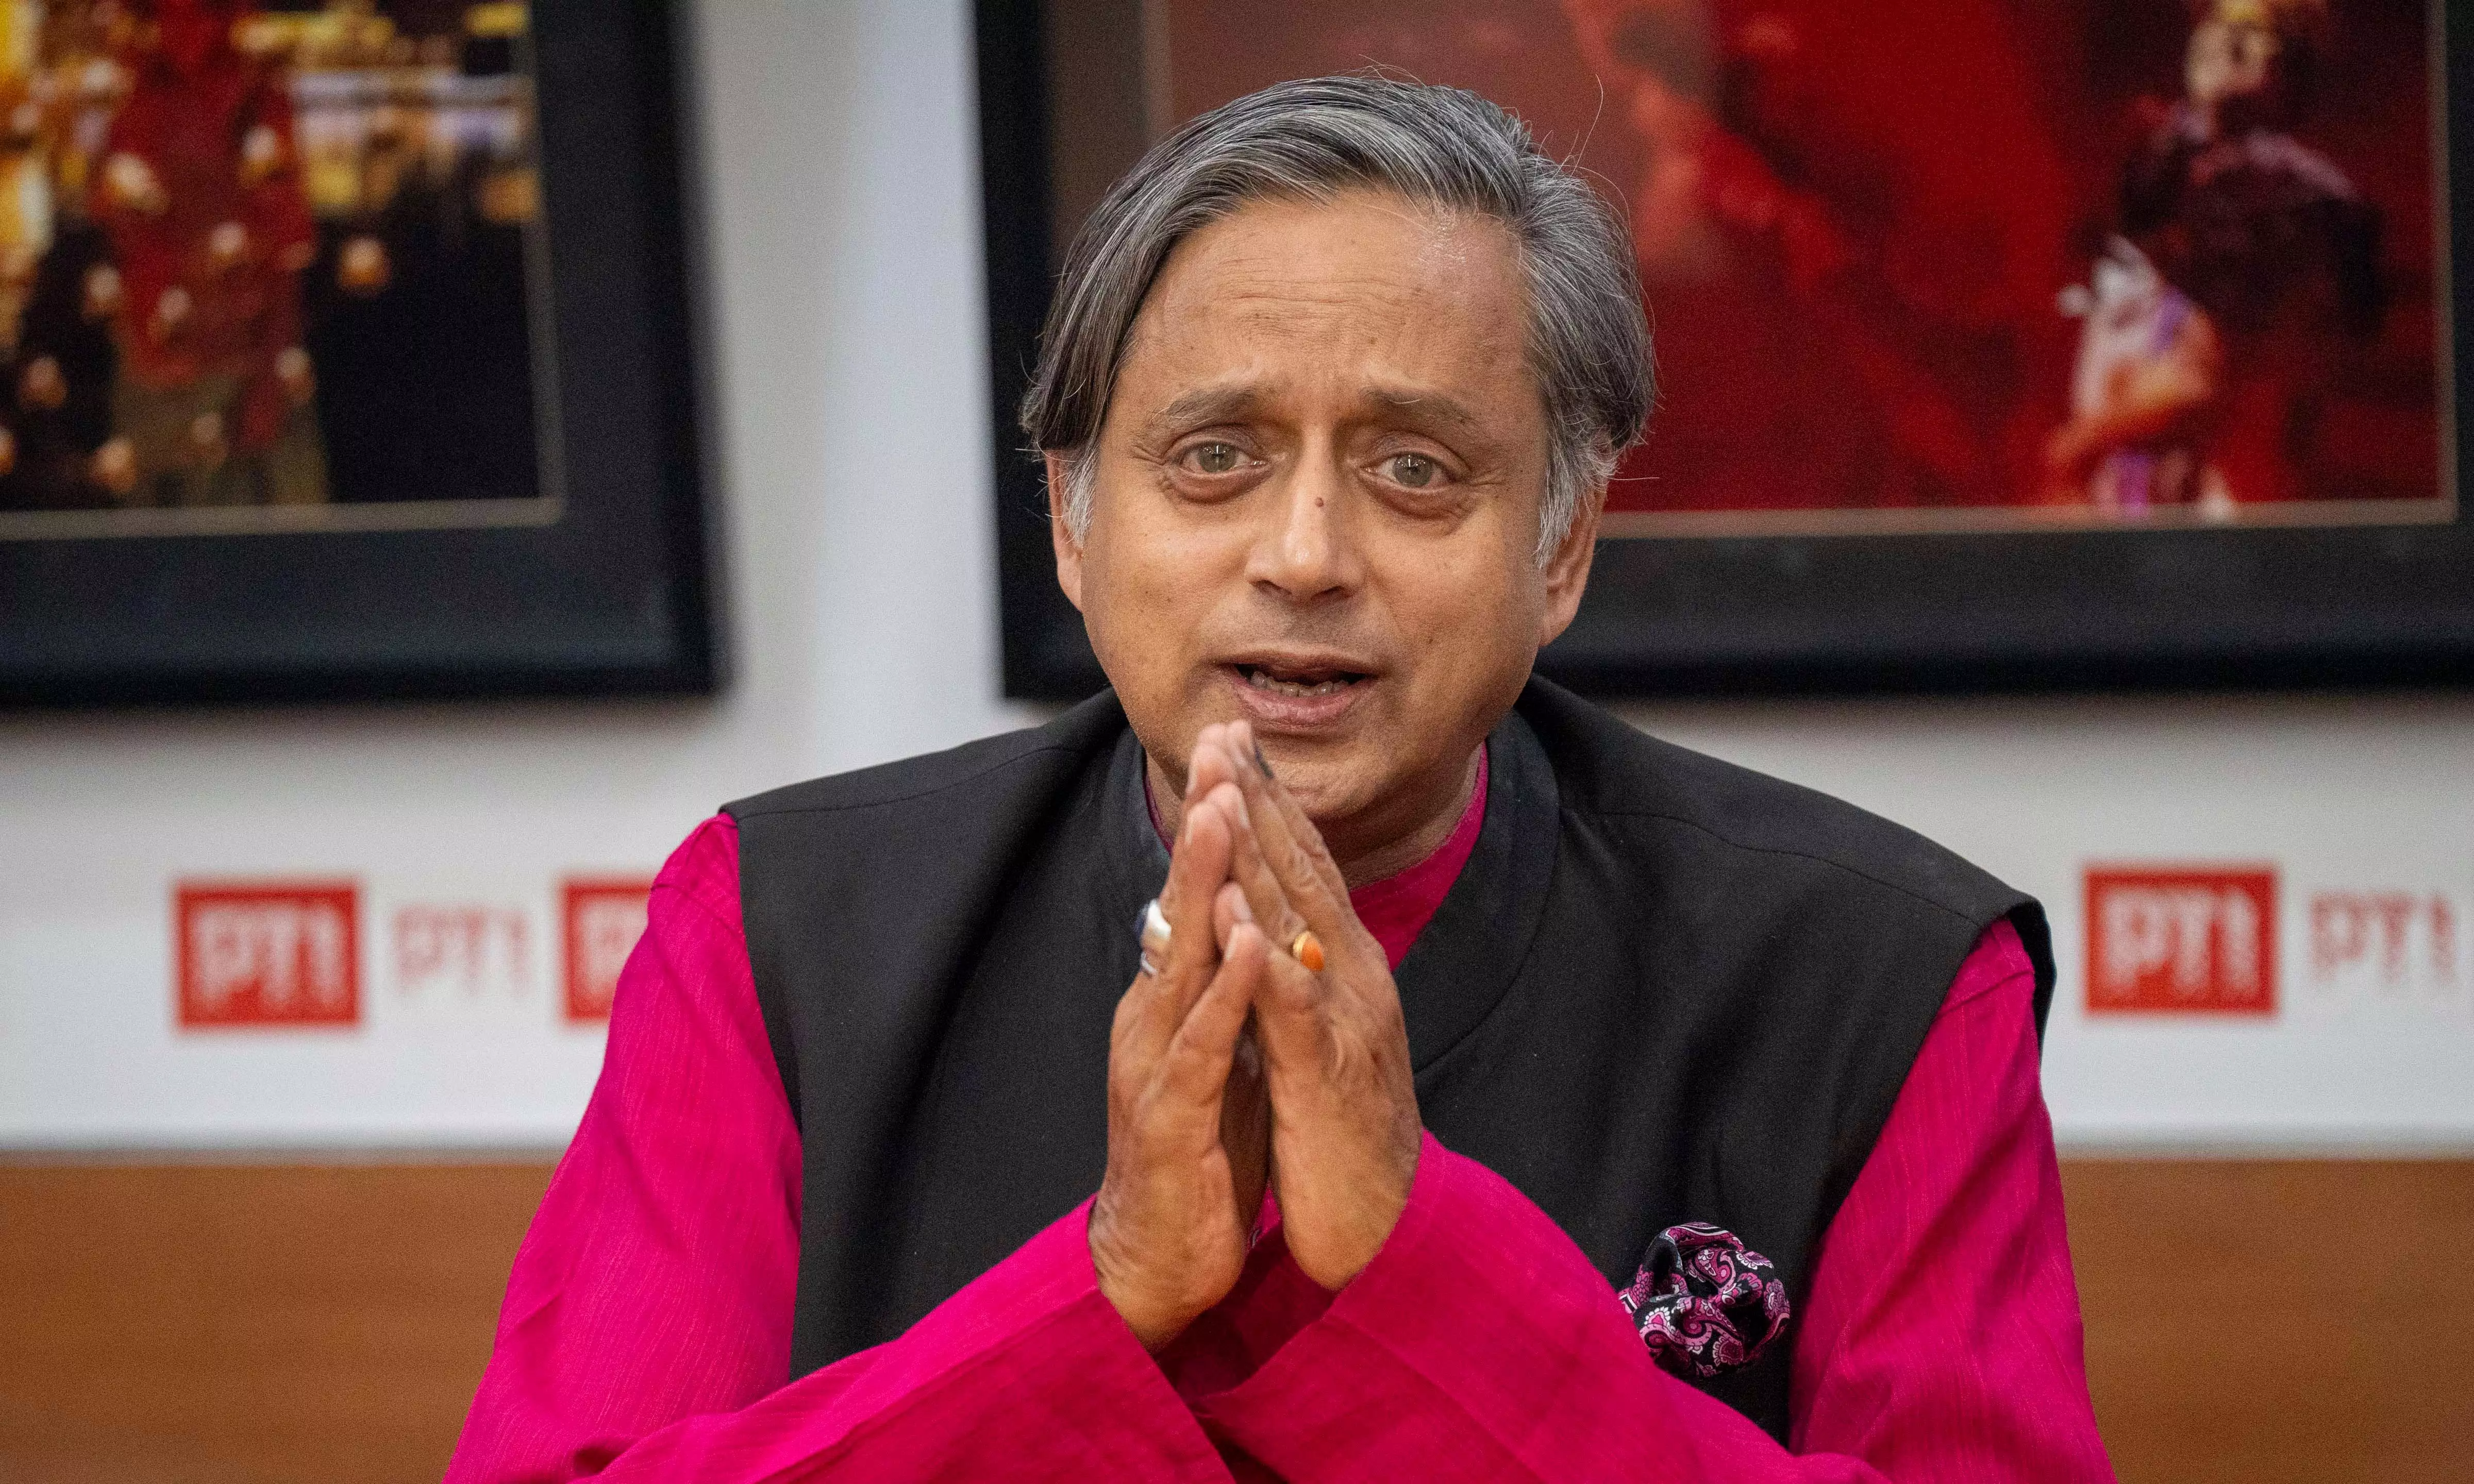 INDIA bloc PM will be first among equals, with Oppn parties uniting: Tharoor